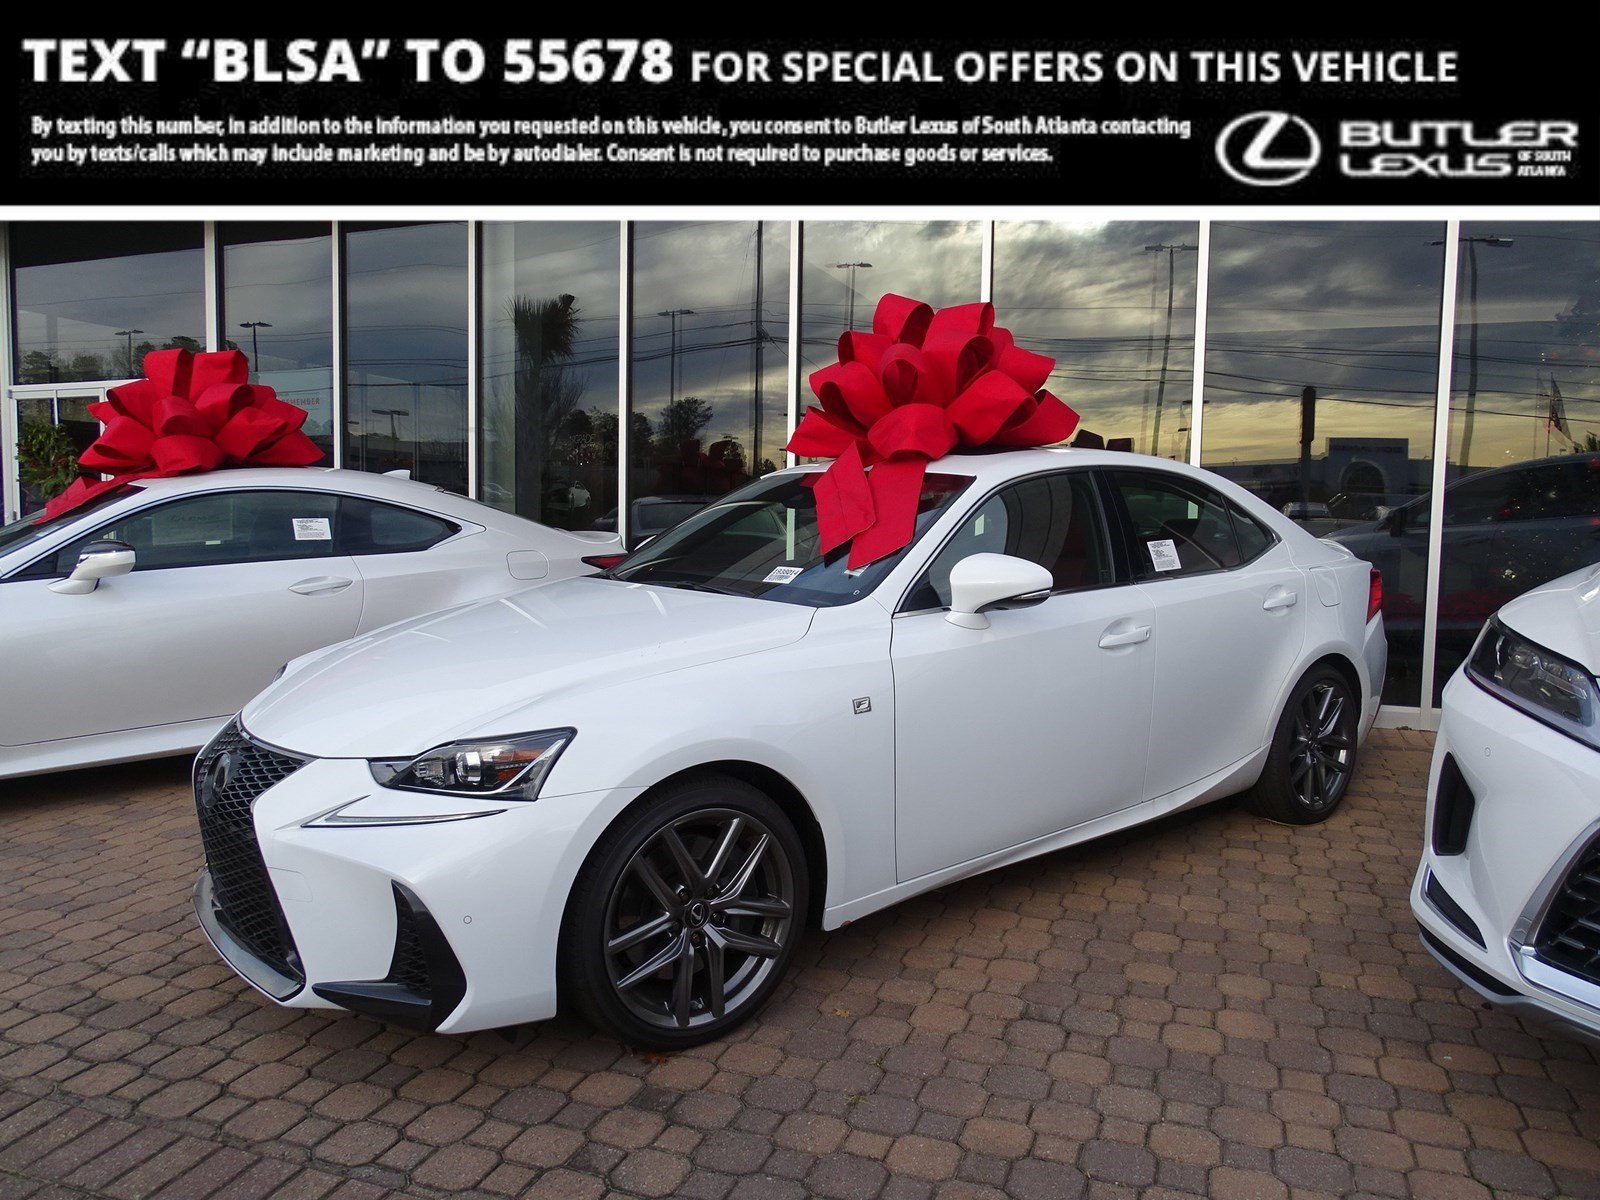 New 2019 Lexus Is Is 300 F Sport With Navigation